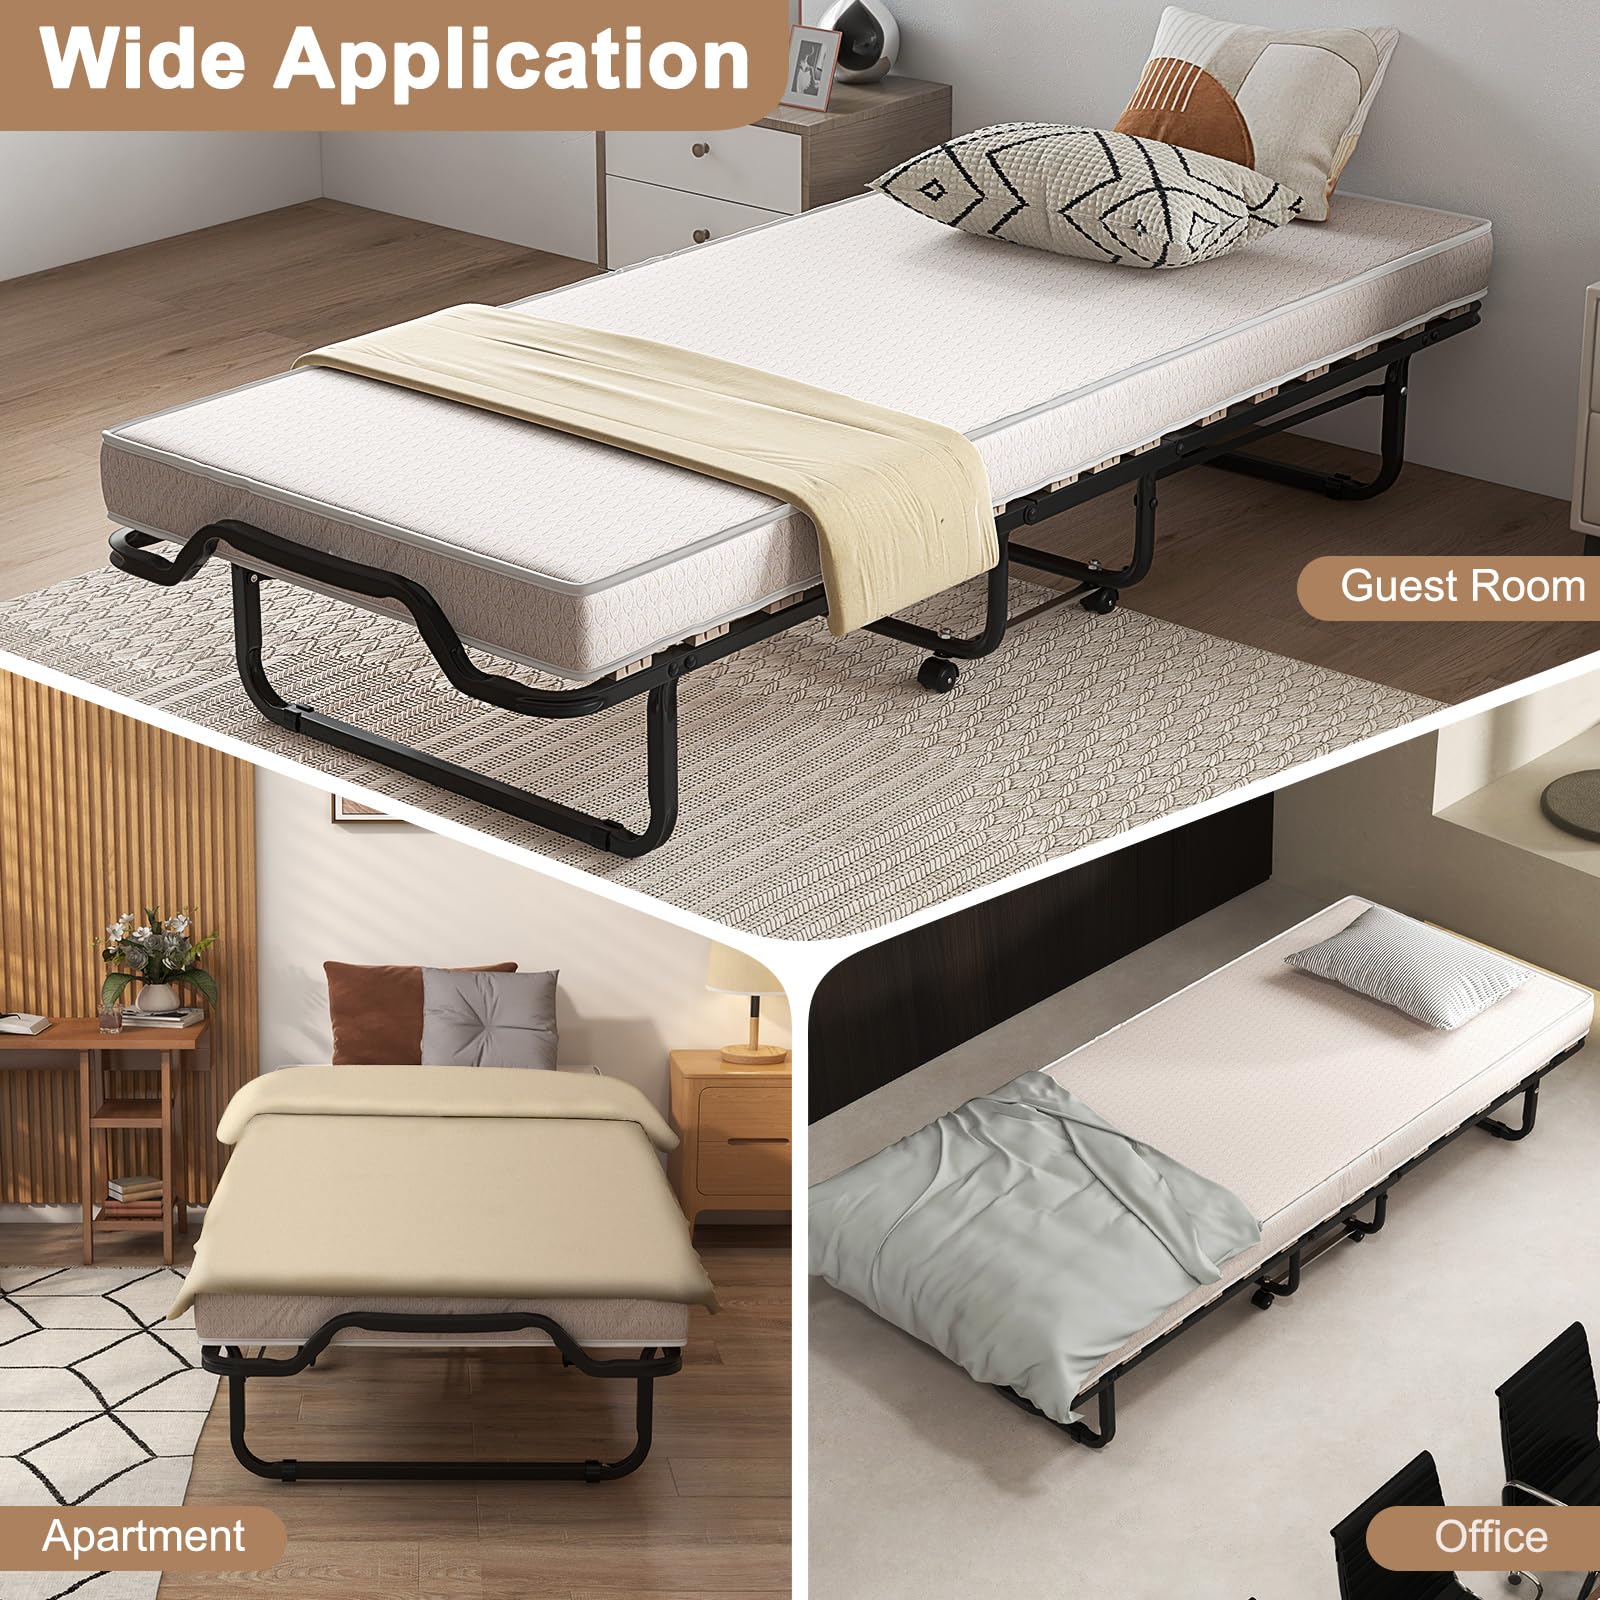 Giantex Folding Bed with Mattress, 75x31 Cot Size Bed Frame, Roll Away Beds with Mattresses for Adults